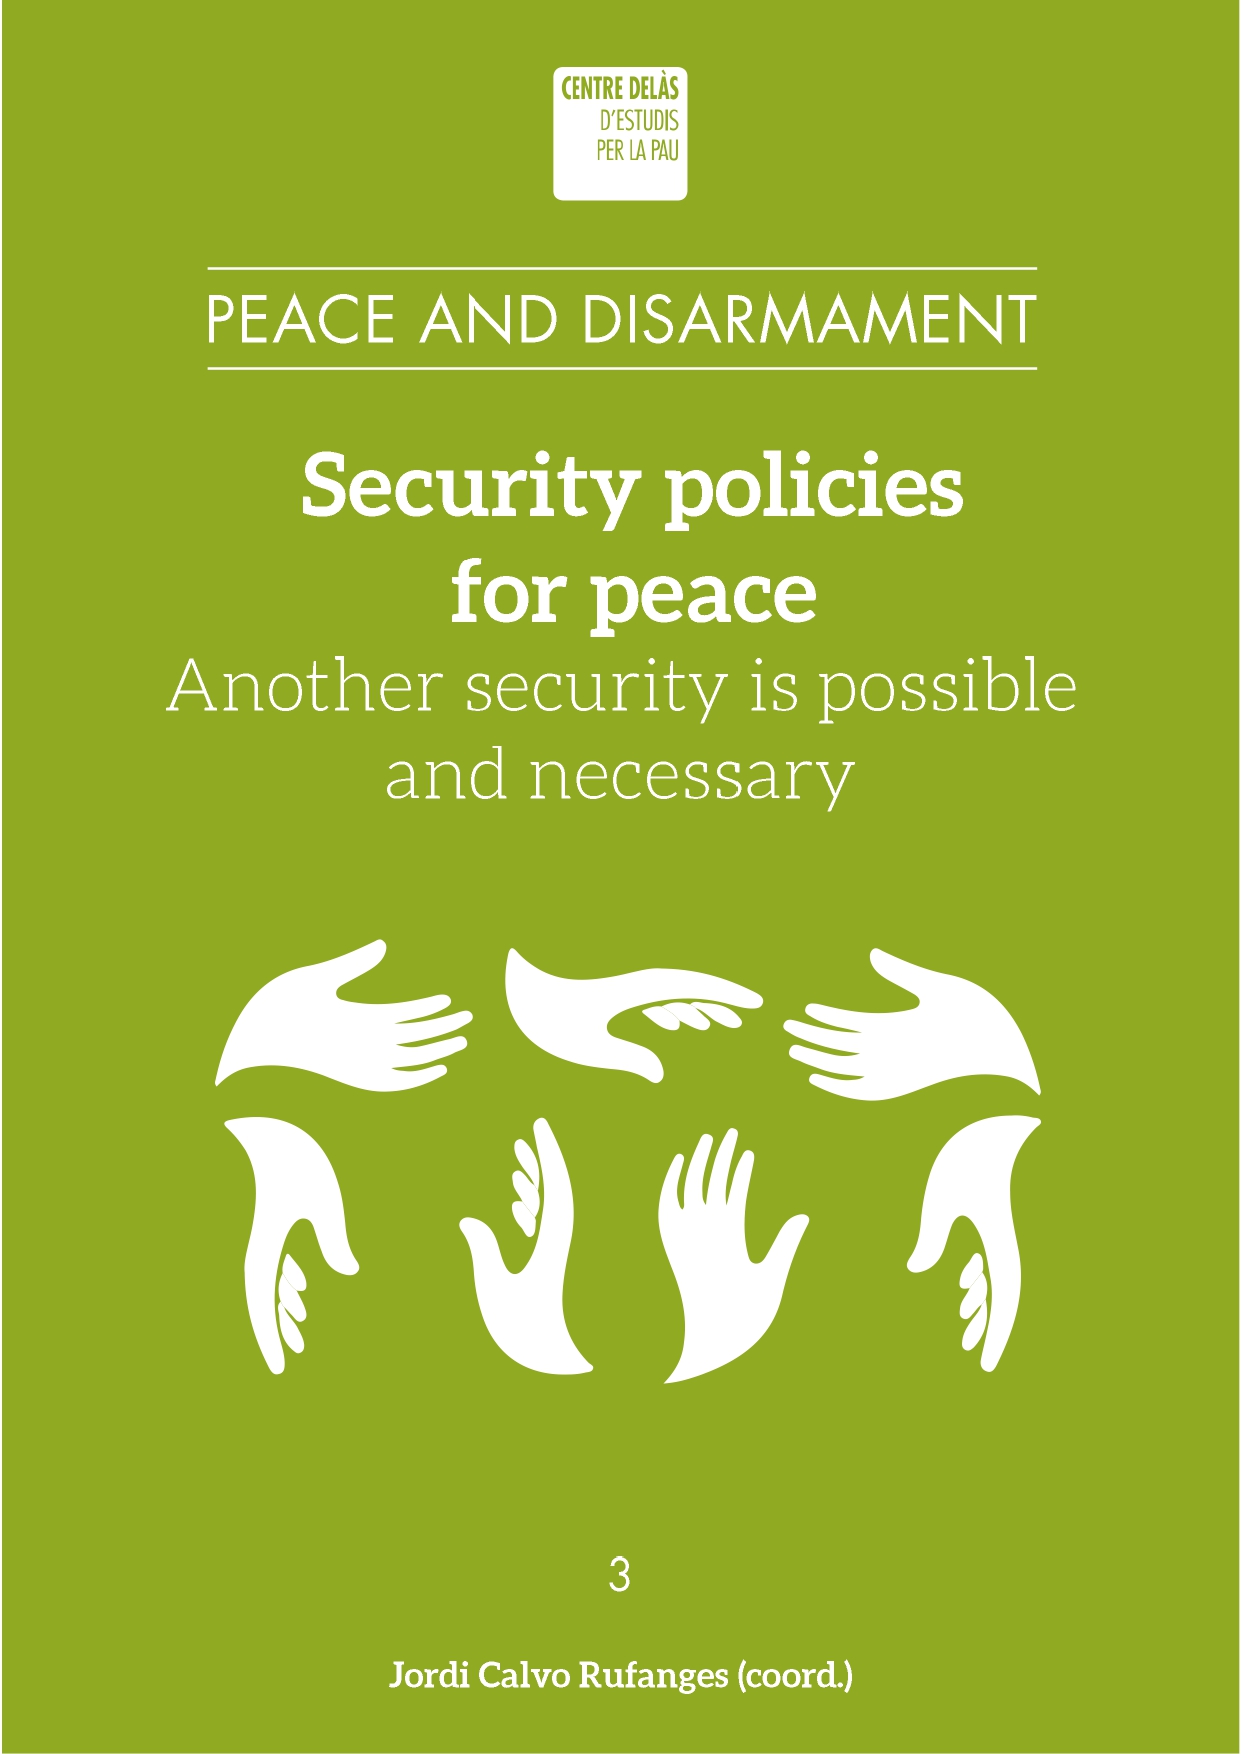 Security policies for peace. Another security is possible and necessary